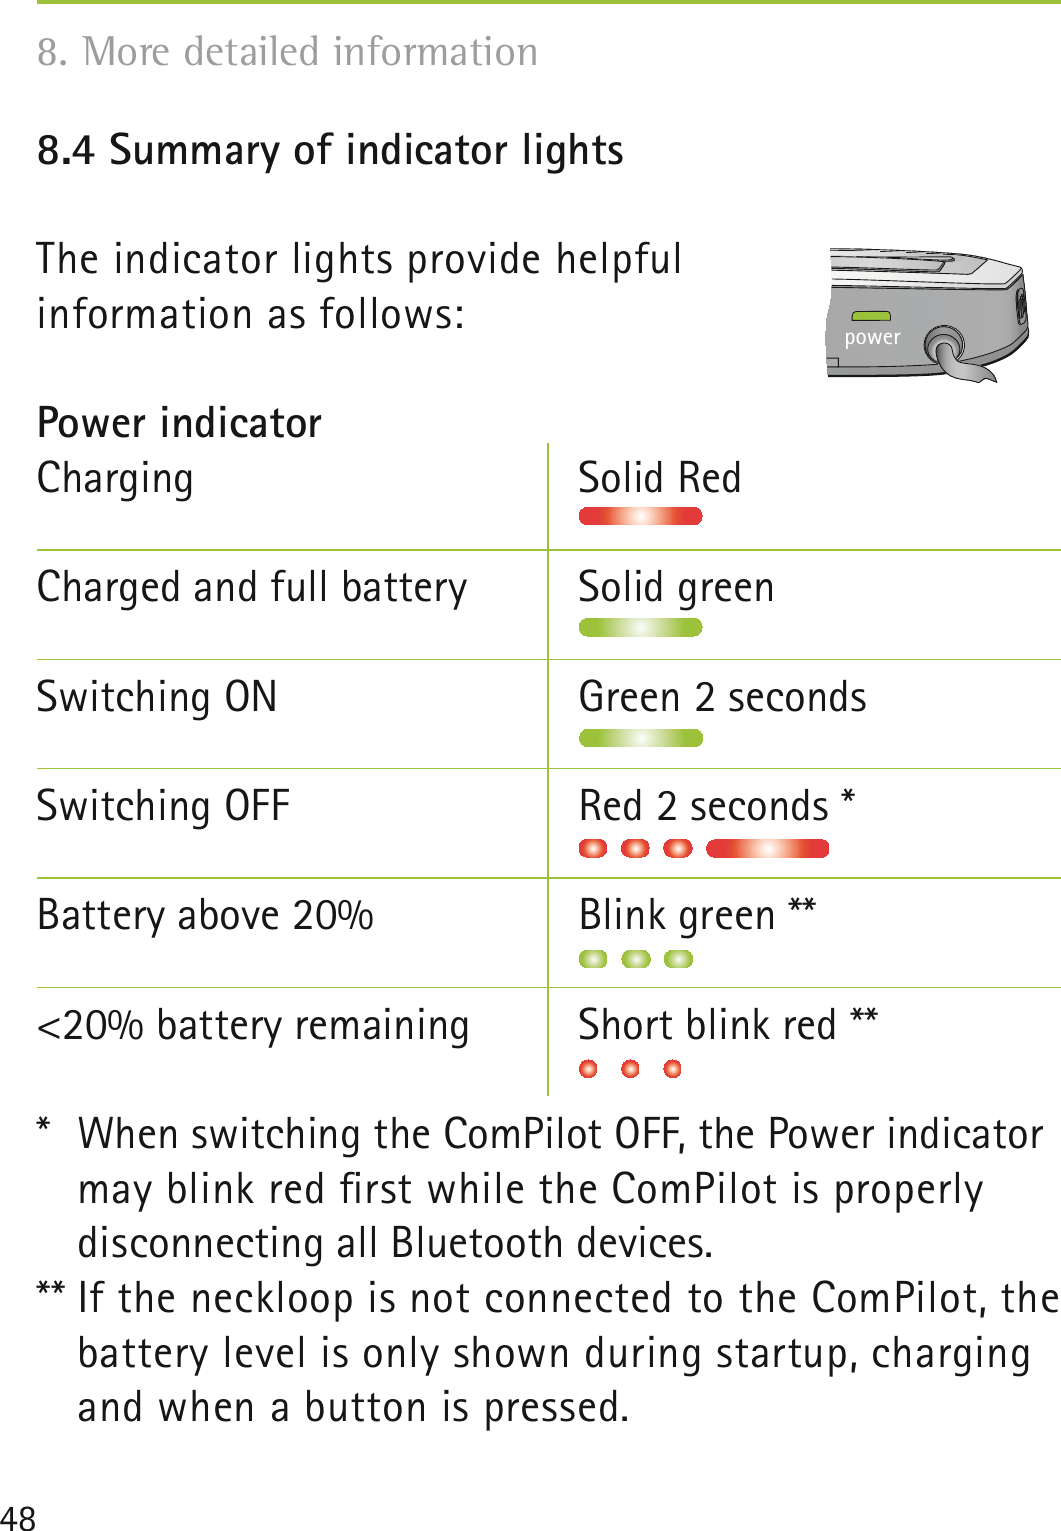 488.4 Summary of indicator lightsThe indicator lights provide helpful  information as follows:Power indicatorCharging Solid RedCharged and full battery  Solid greenSwitching ON  Green 2 secondsSwitching OFF  Red 2 seconds *Battery above 20%  Blink green ** &lt;20% battery remaining  Short blink red ***  When switching the ComPilot OFF, the Power indicator may blink red ﬁrst while the ComPilot is properly  disconnecting all Bluetooth devices.** If the neckloop is not connected to the ComPilot, the battery level is only shown during startup, charging and when a button is pressed.power8. More detailed information 